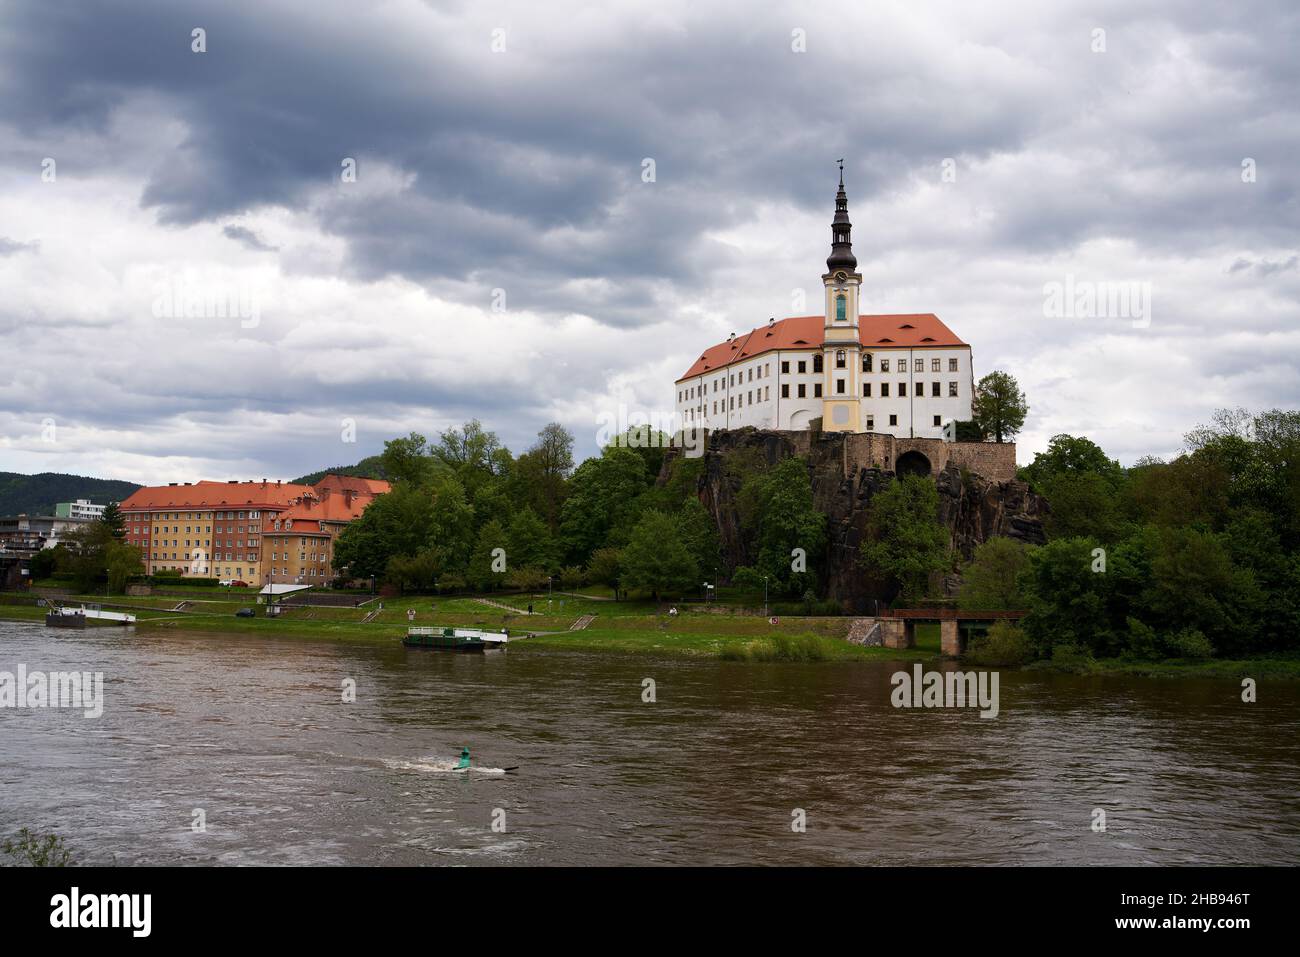 DECIN, CZECH REPUBLIC - MAY 22, 2021: Castle and the Elbe river Stock Photo